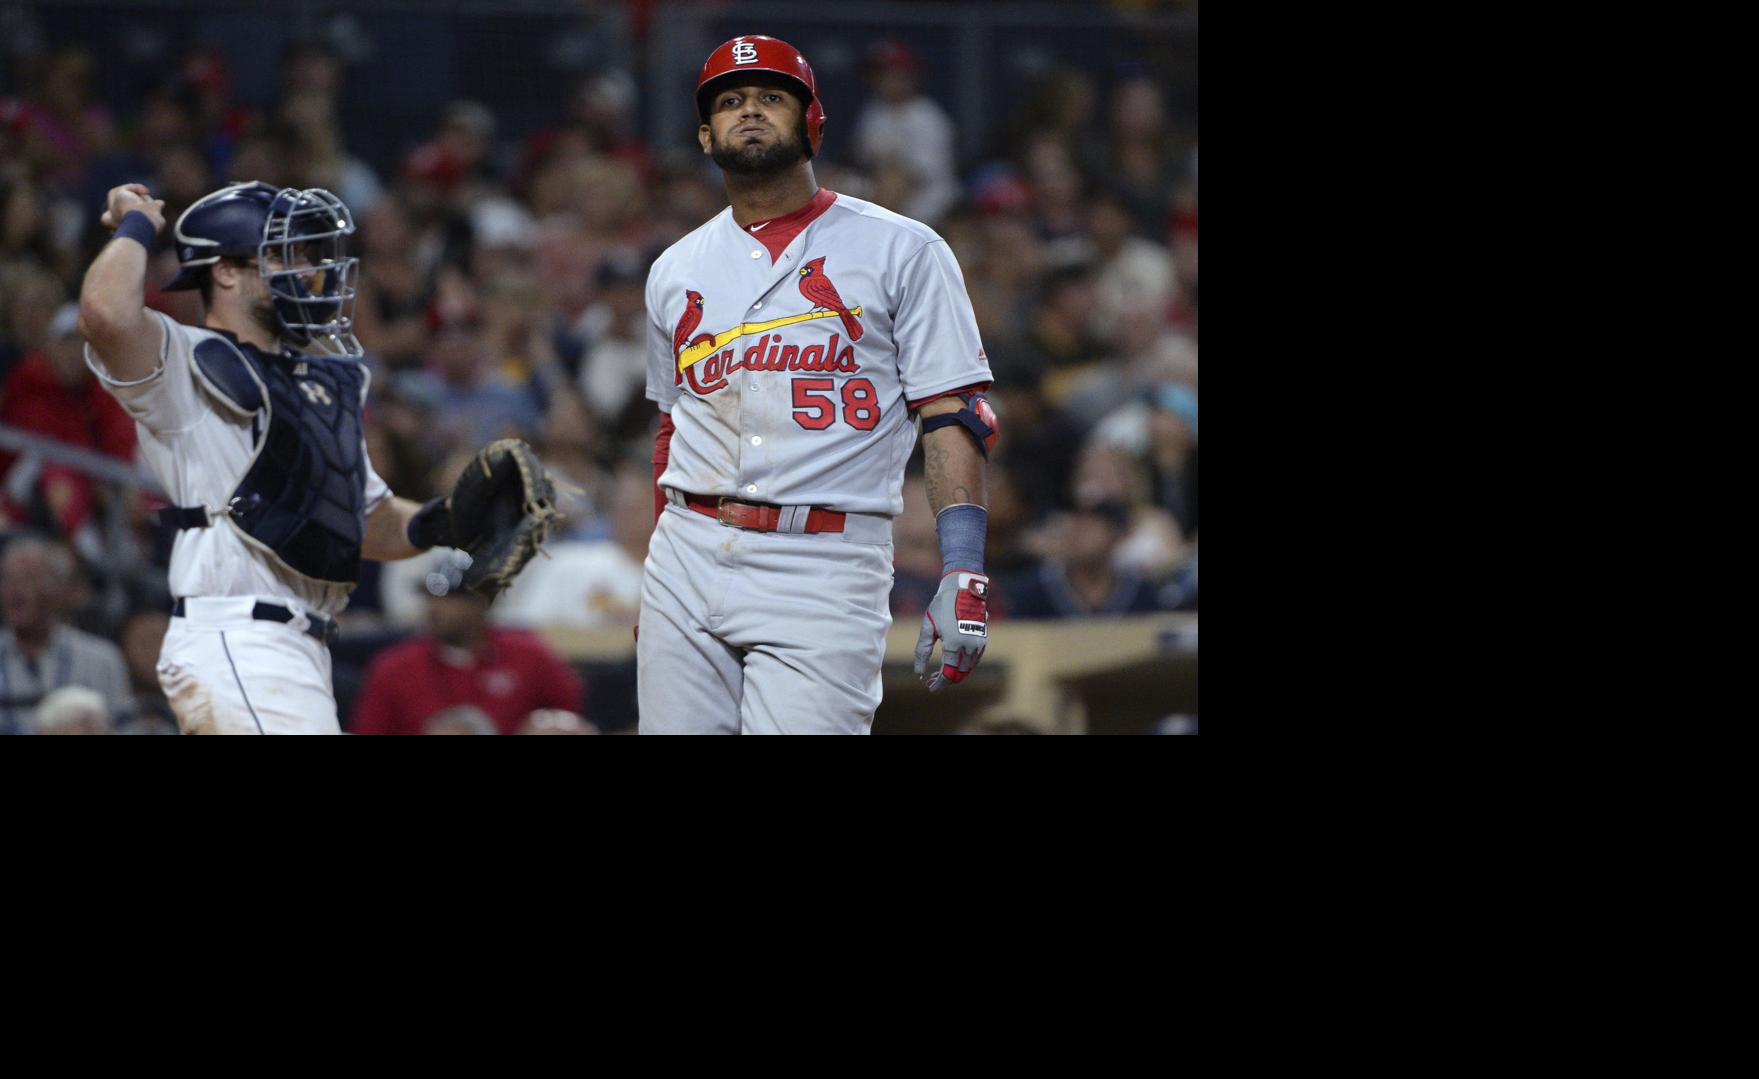 No support for Lynn again as Cards lose ground in standings | St. Louis Cardinals | 0